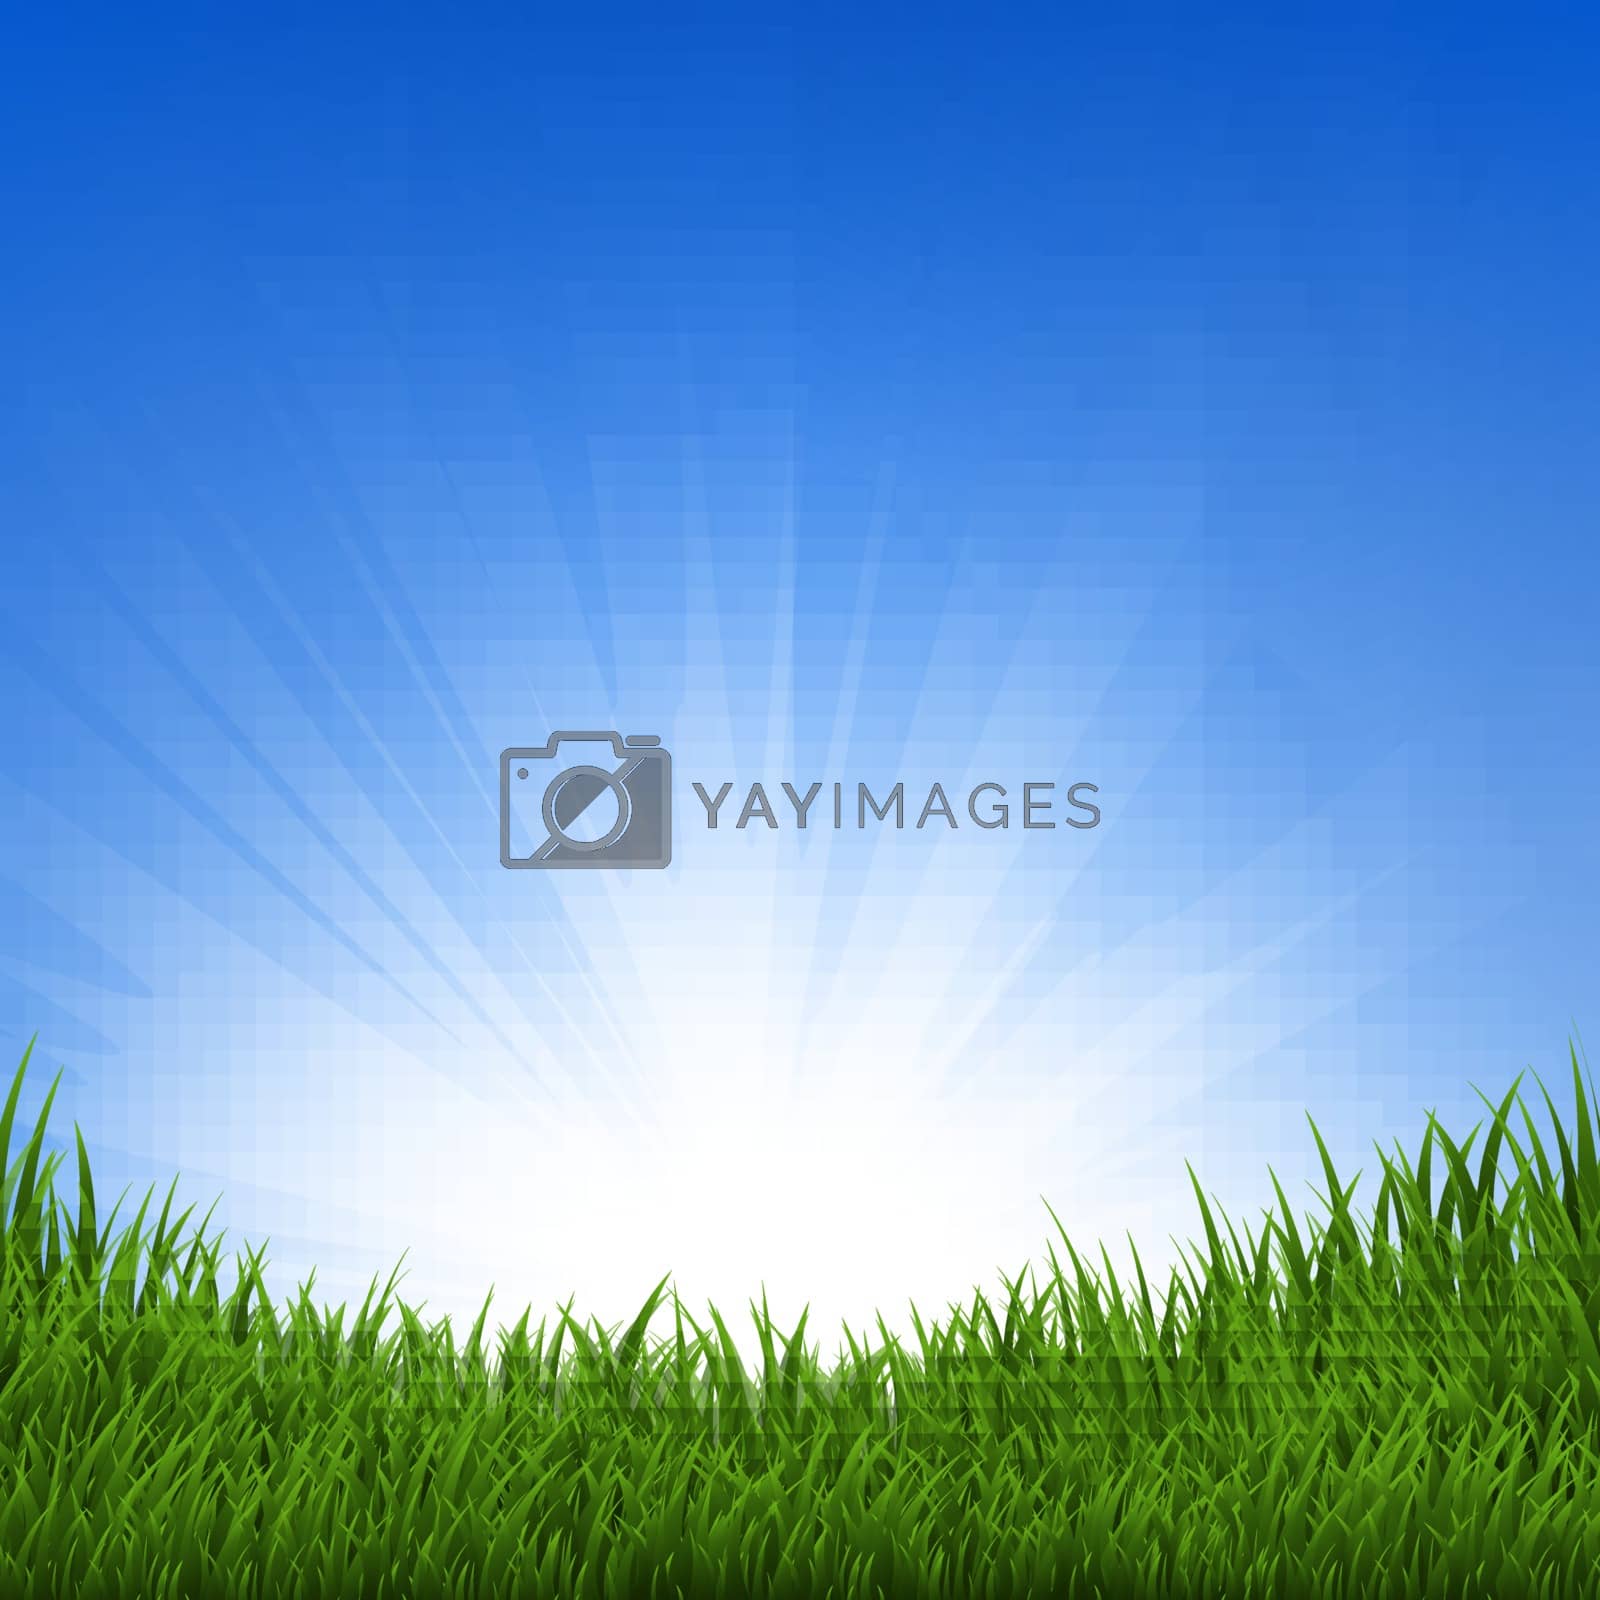 Royalty free image of Grass And Sunbeam by barbaliss